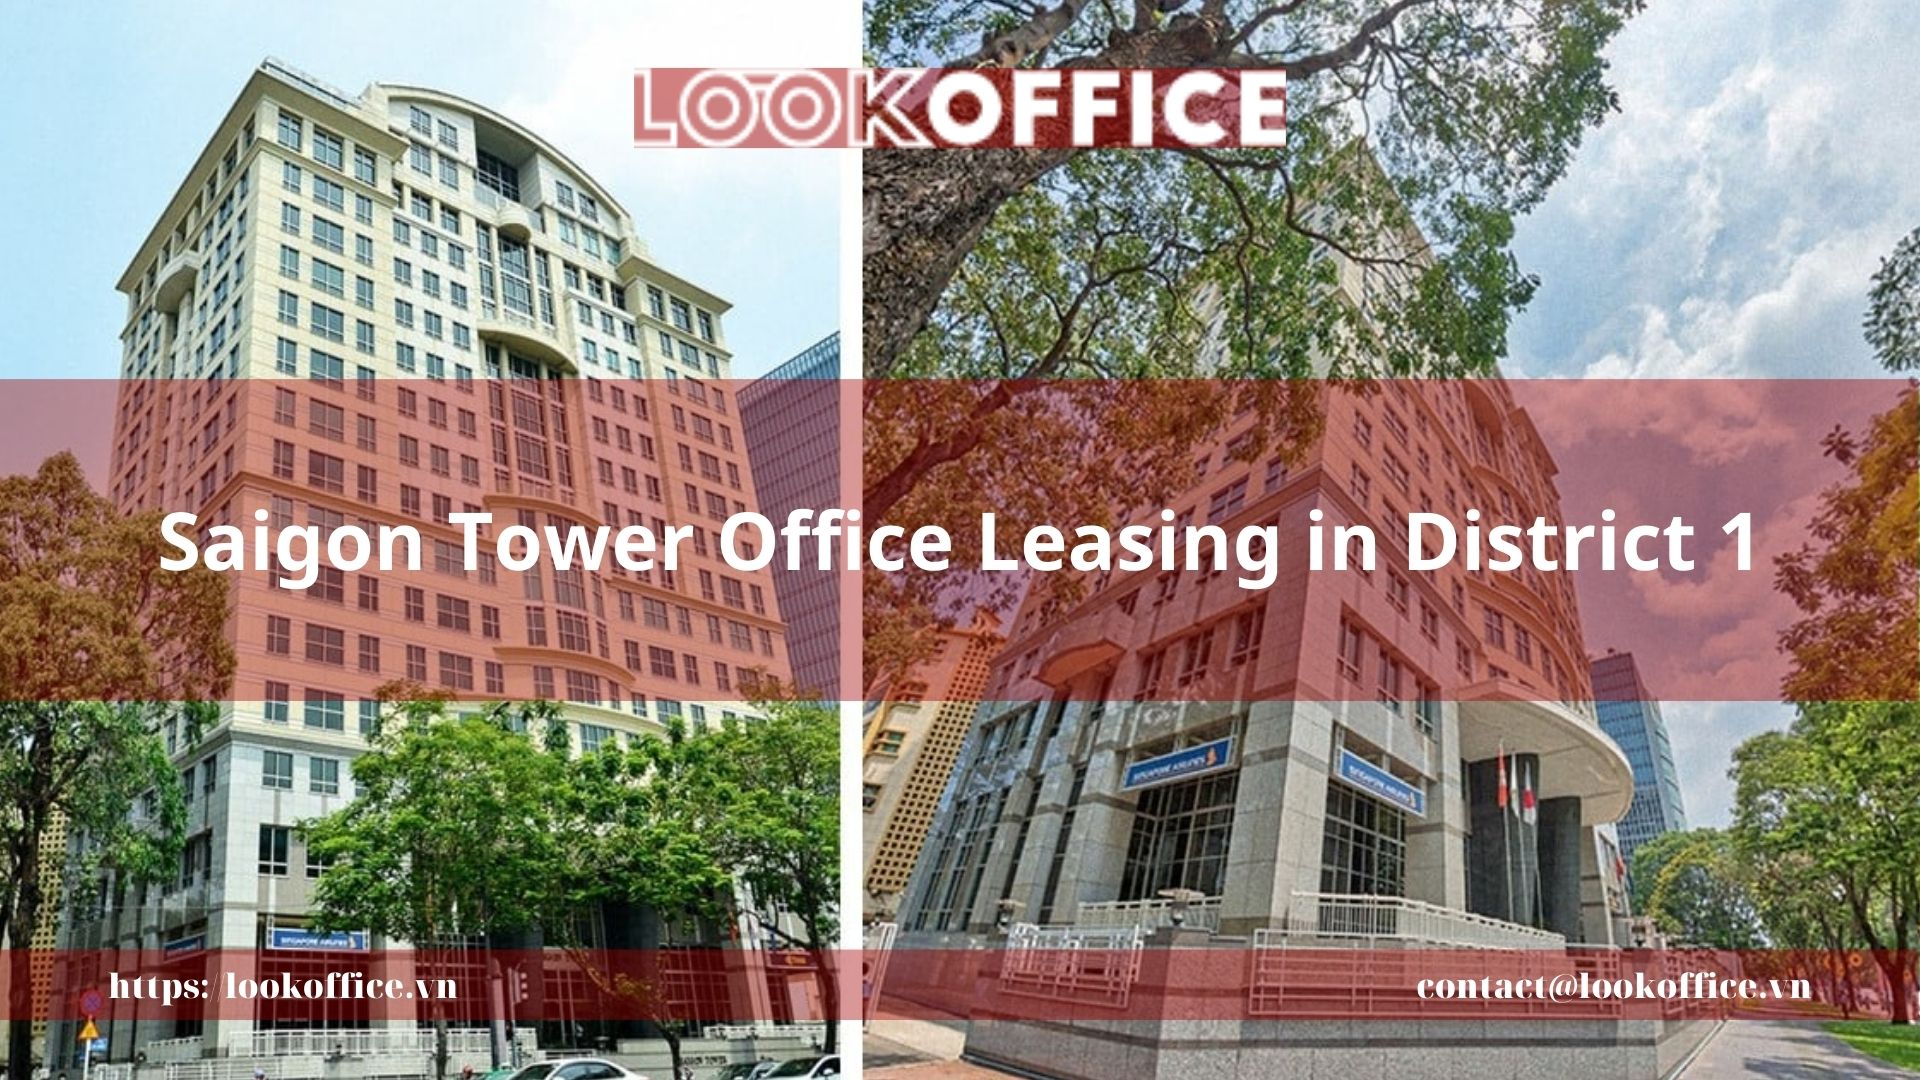 Saigon Tower Office Leasing in District 1